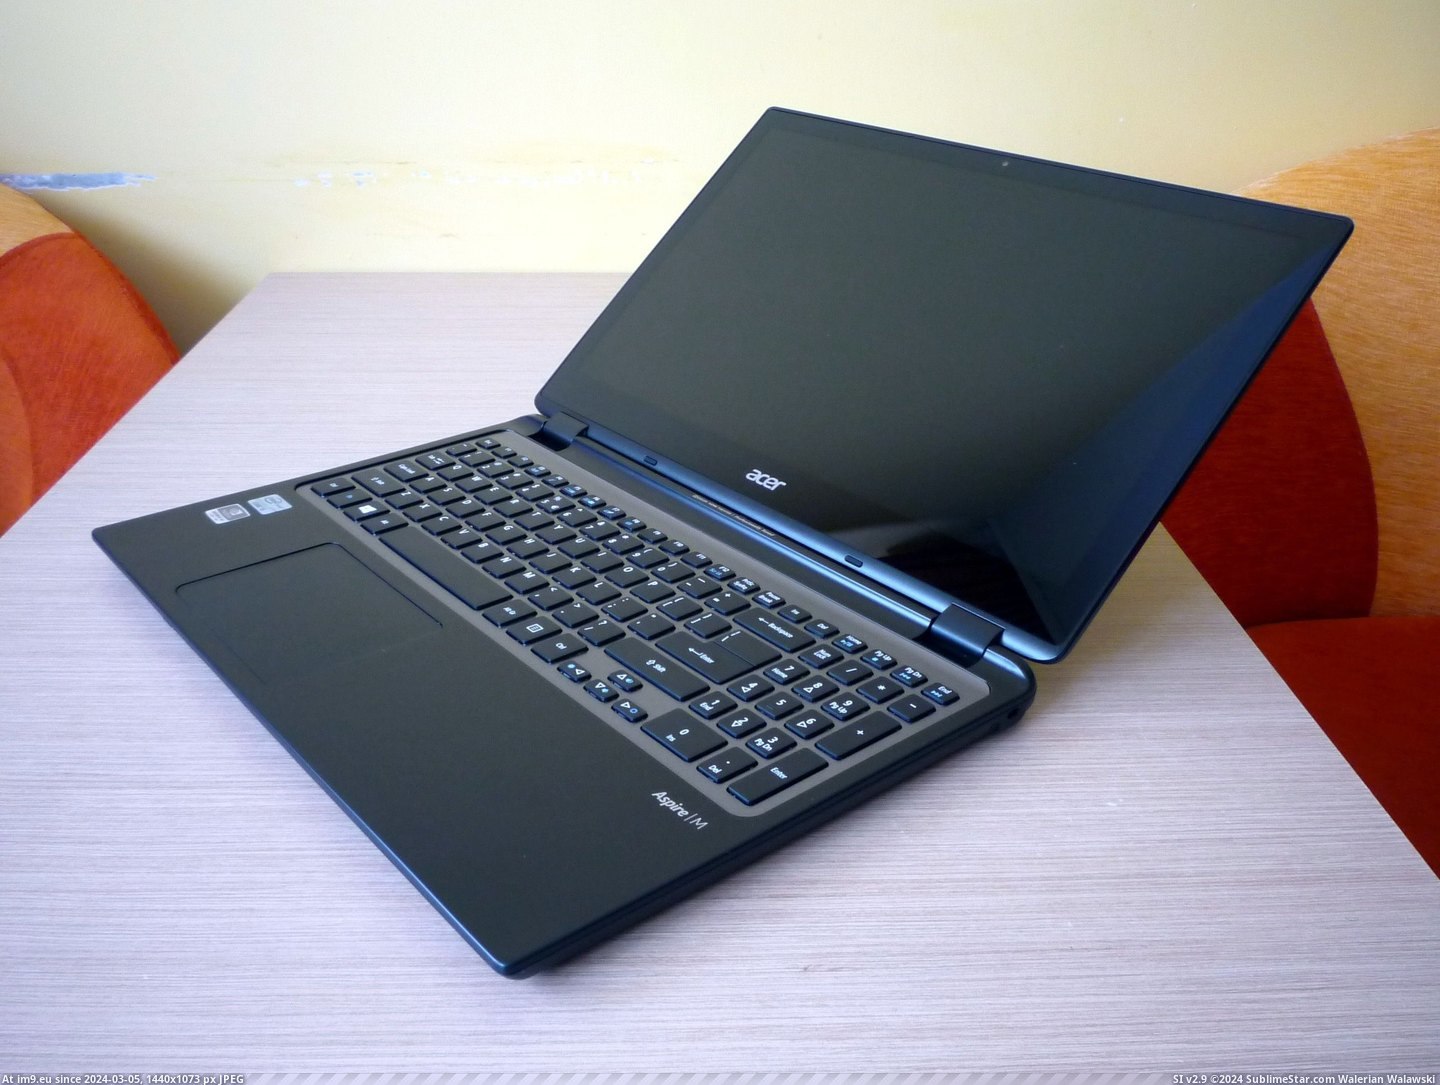 #Wide #Acer #Aspire #Touch Acer Aspire M3 Touch - open wide Pic. (Изображение из альбом Rehost))